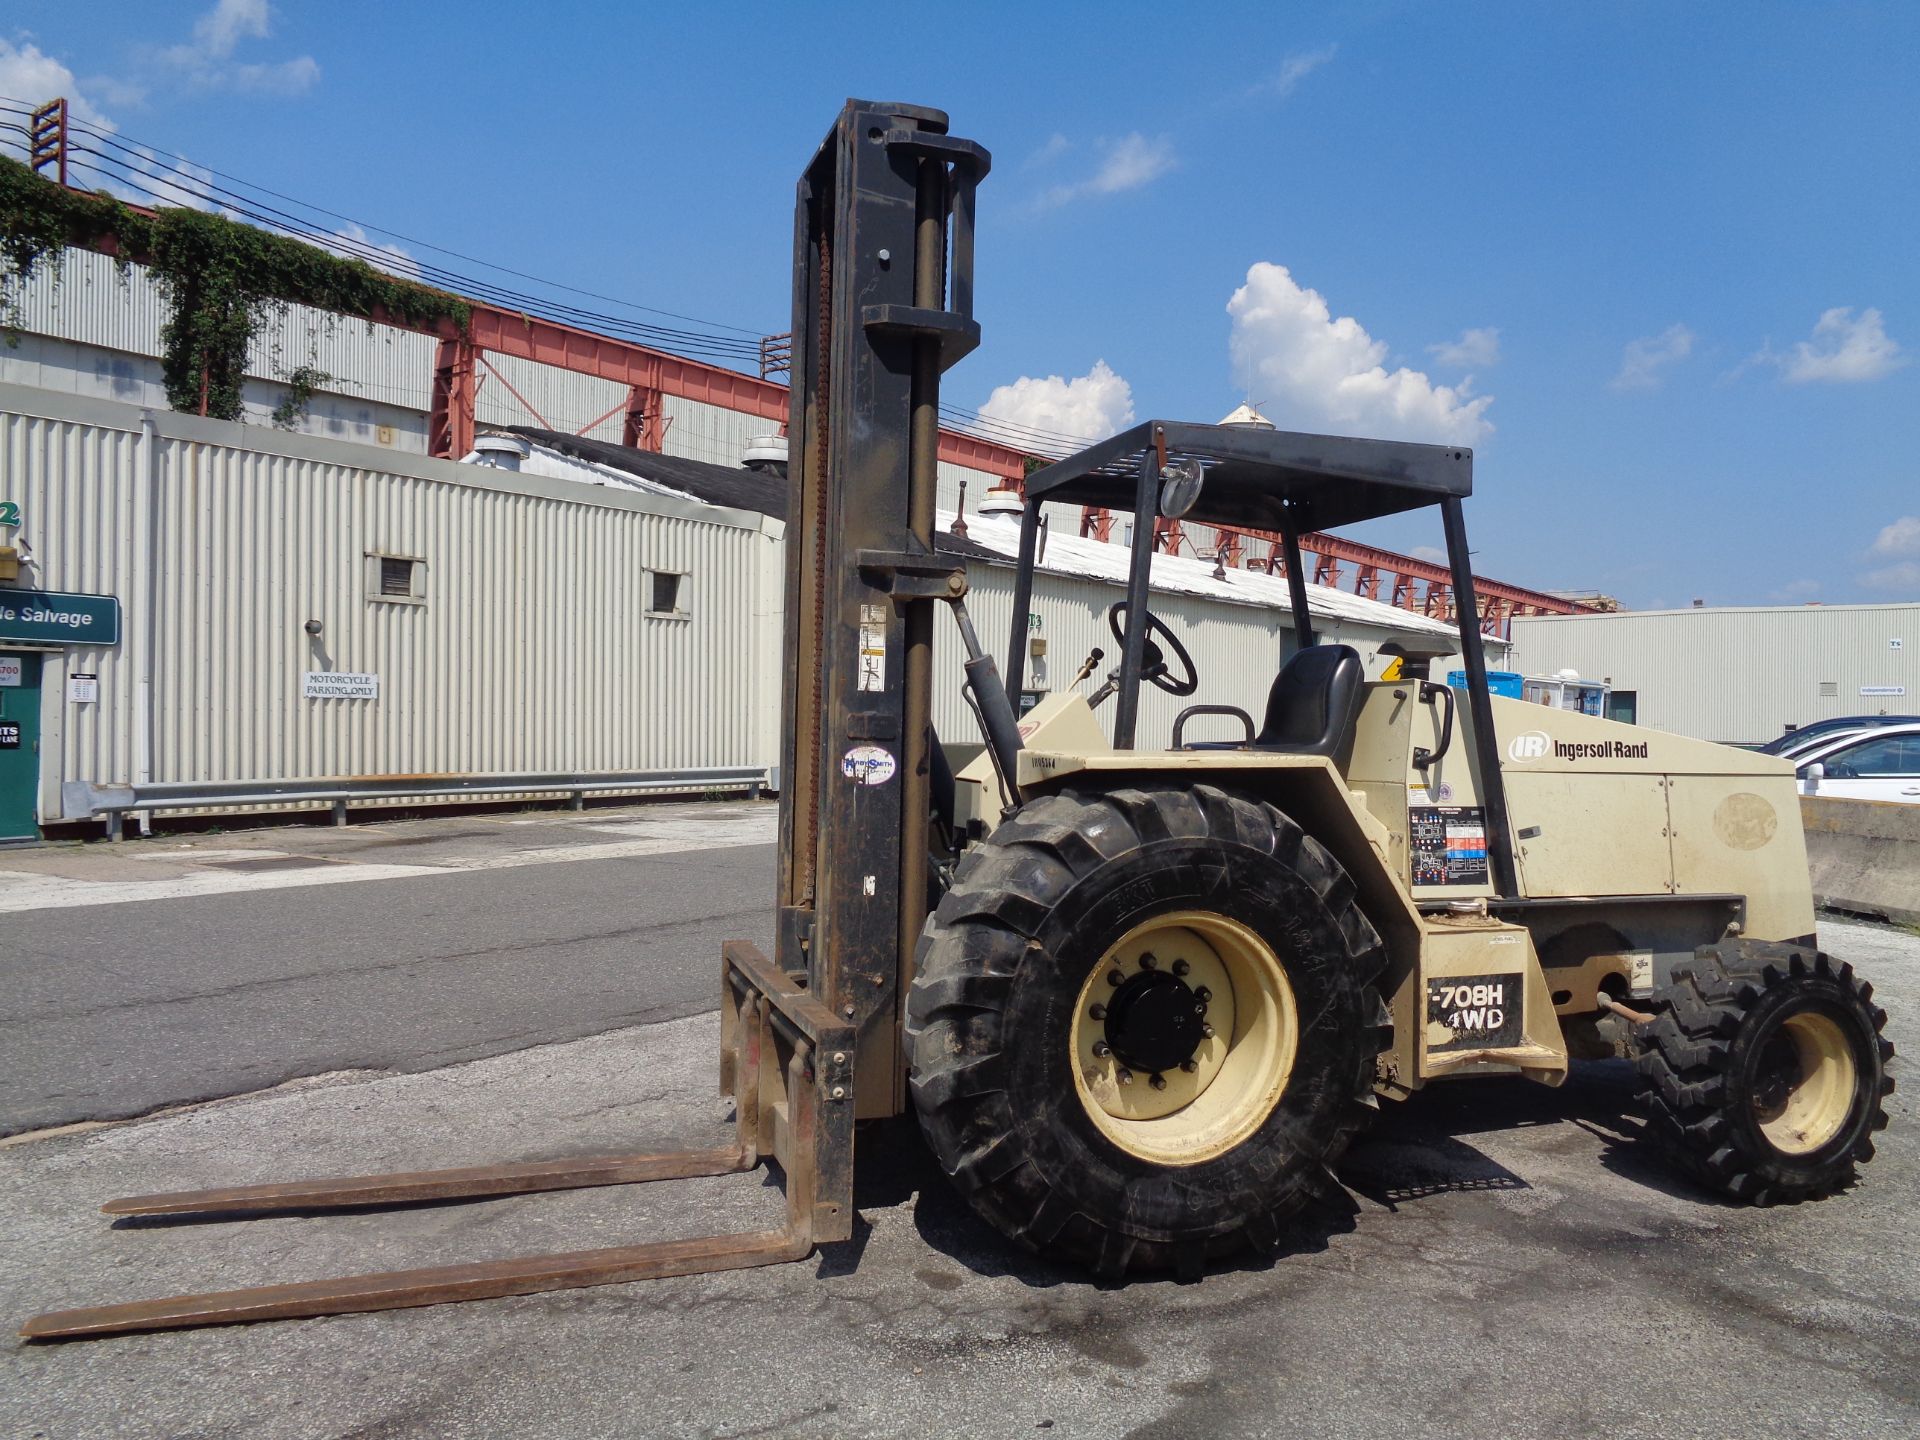 2005 Ingersoll Rand RT708H 8,000lb Rough Terrain Forklift - Only 455 hours - Image 10 of 19